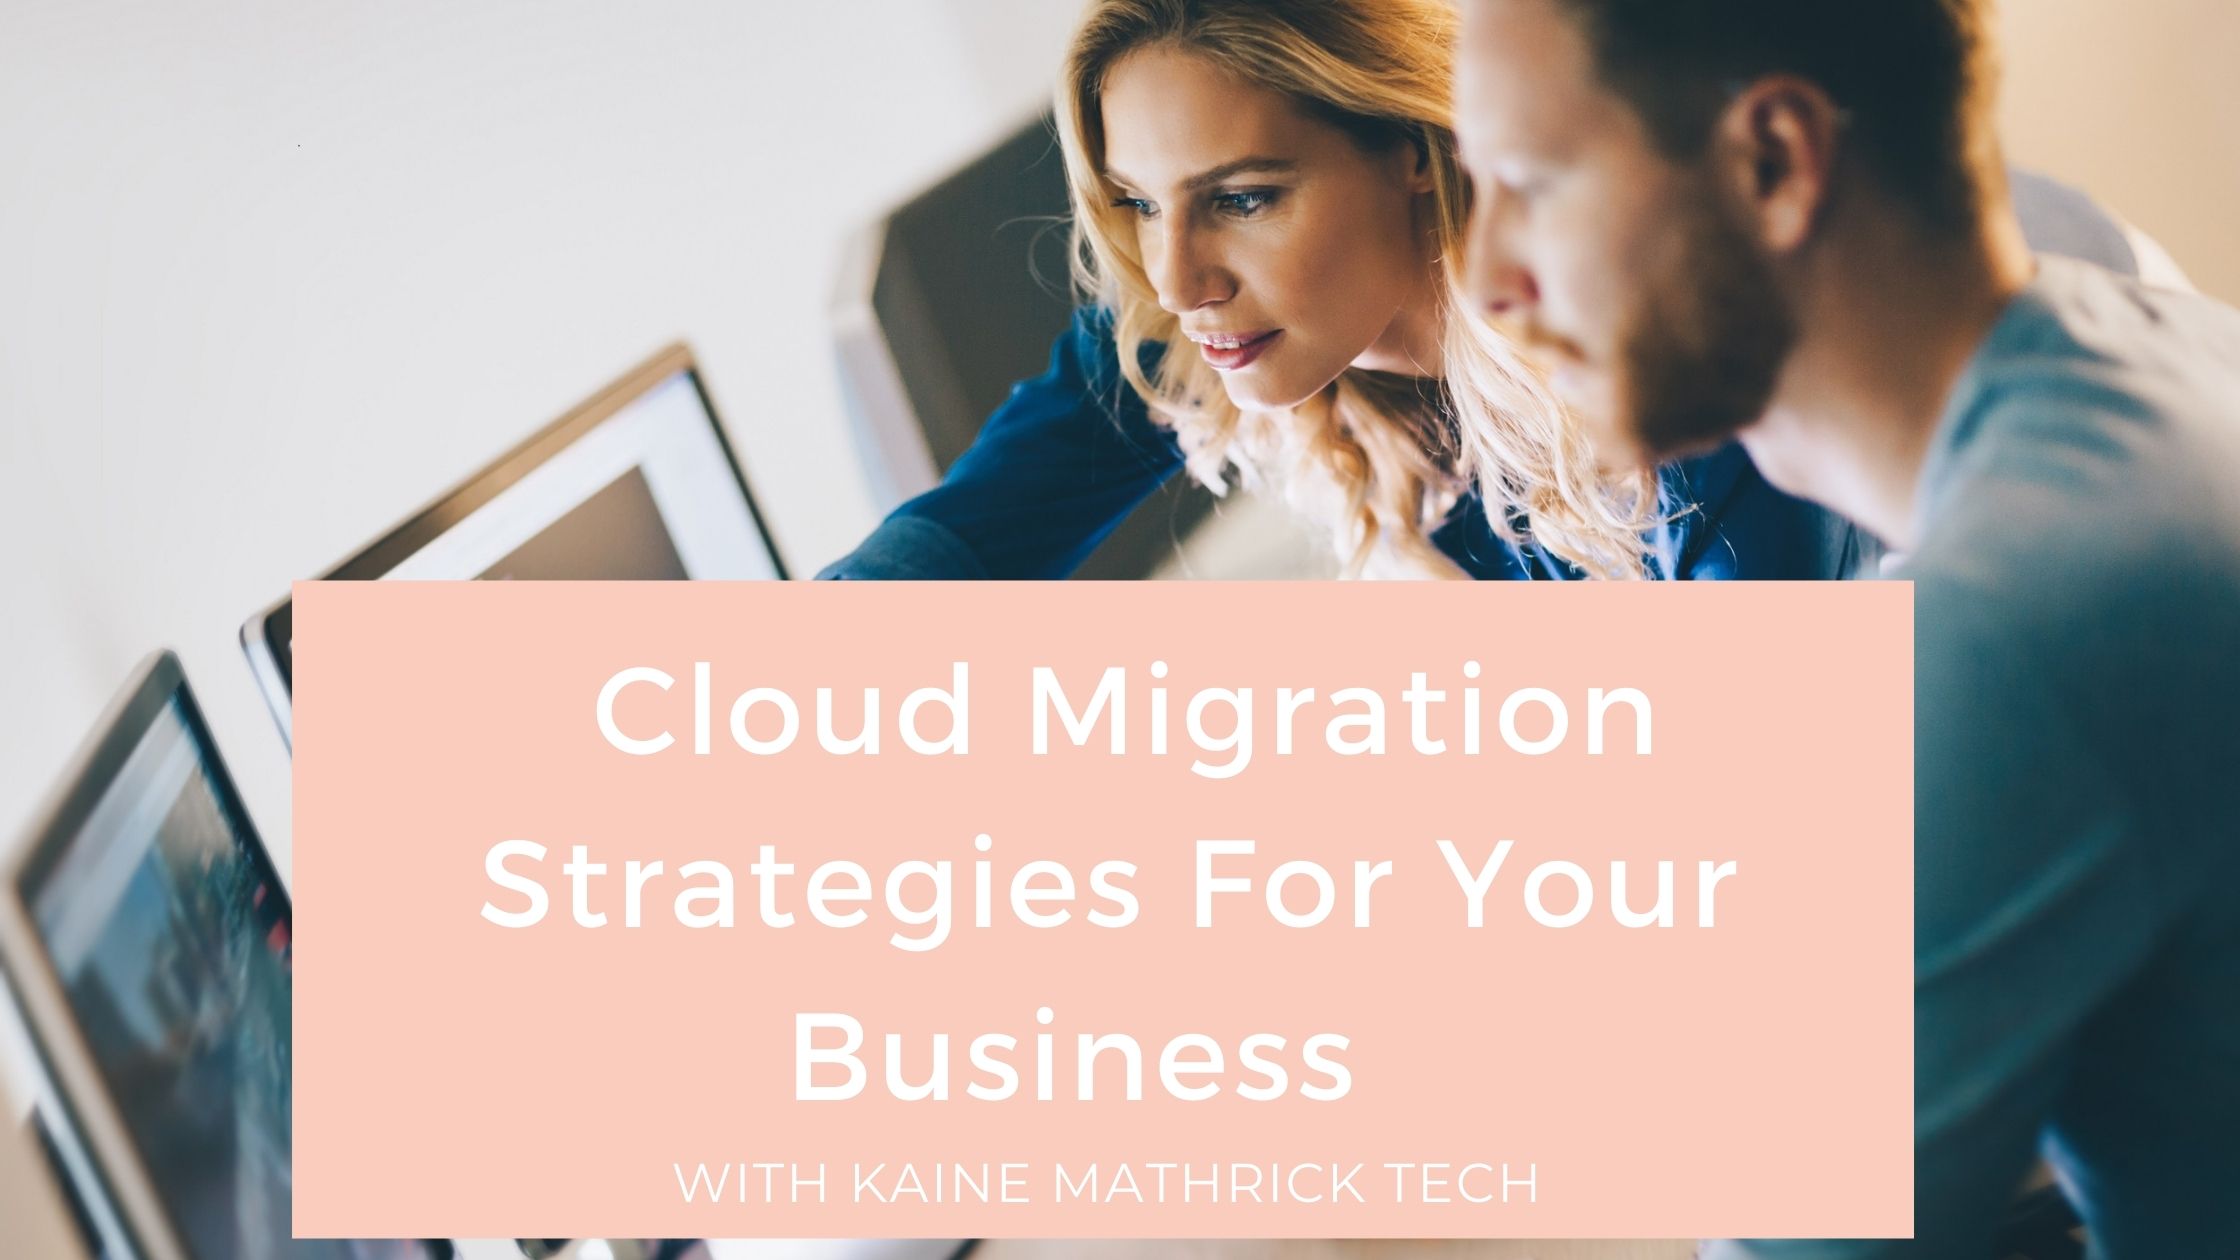 Cloud Migration Strategies For Your Business